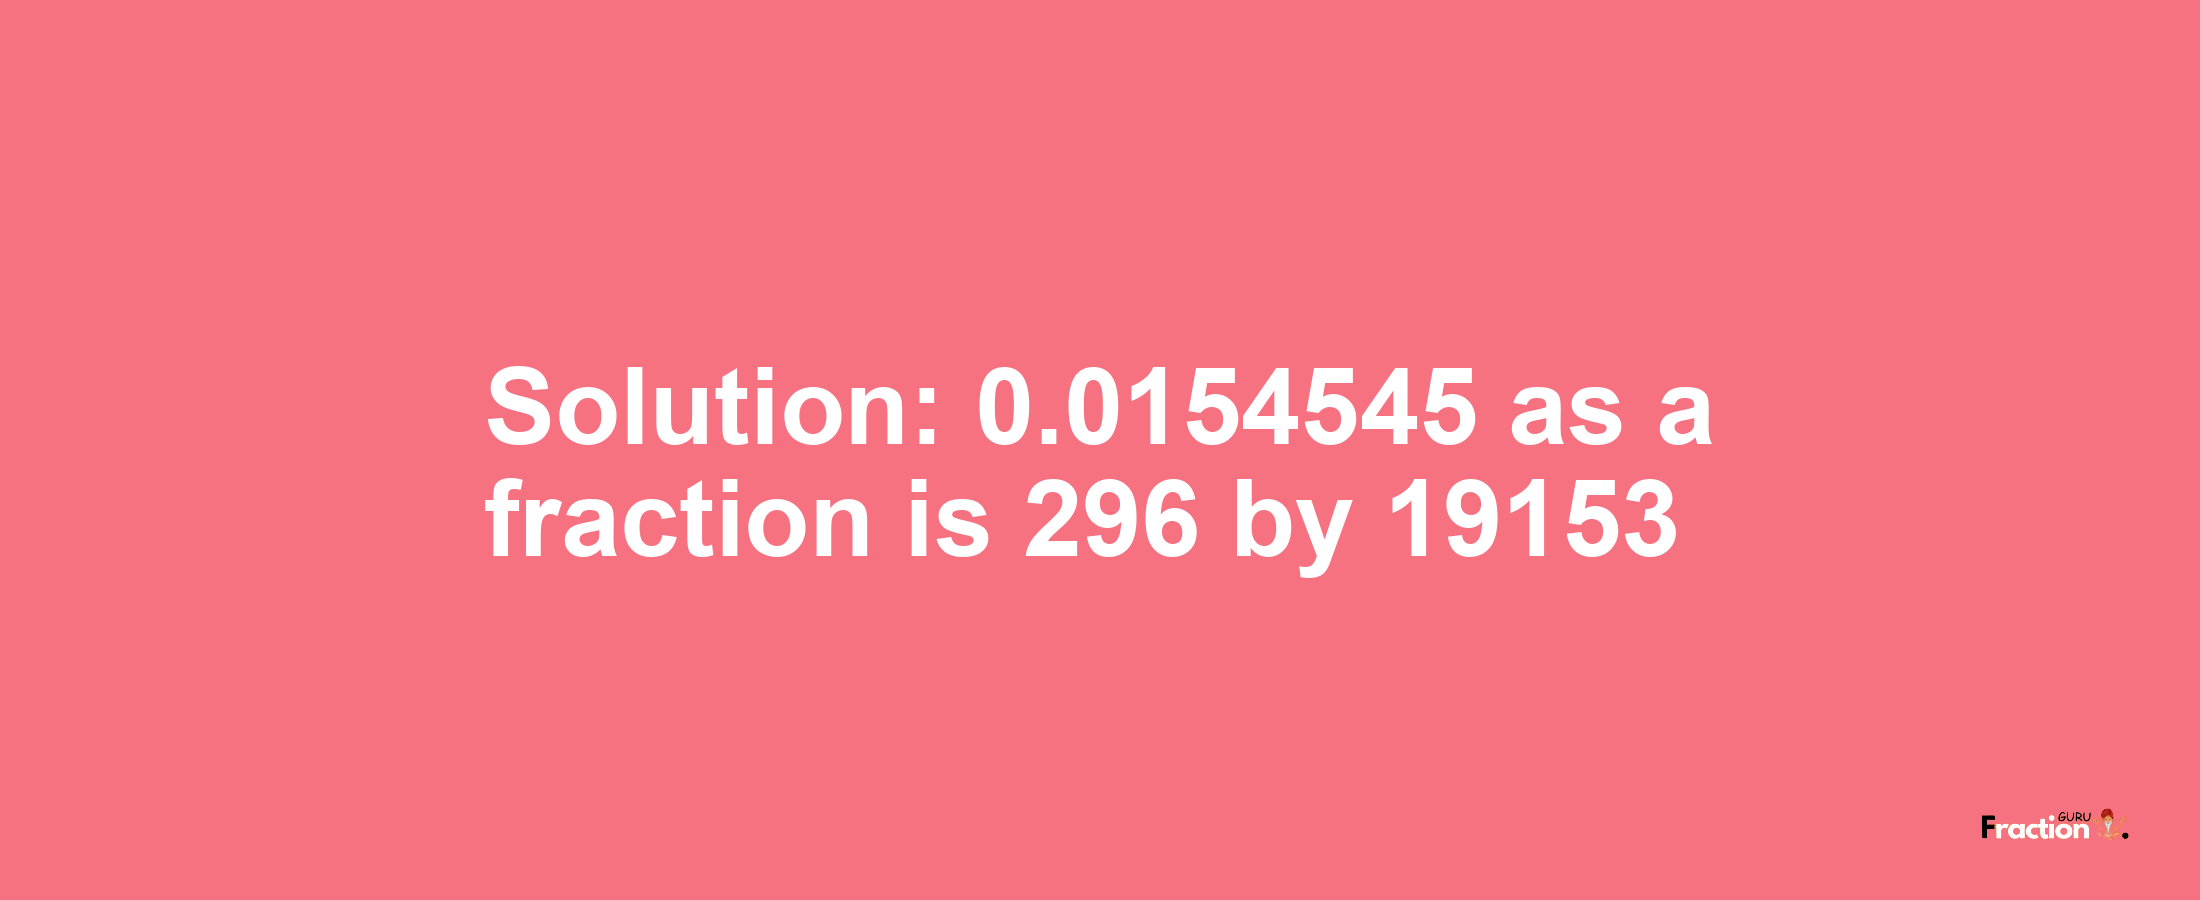 Solution:0.0154545 as a fraction is 296/19153